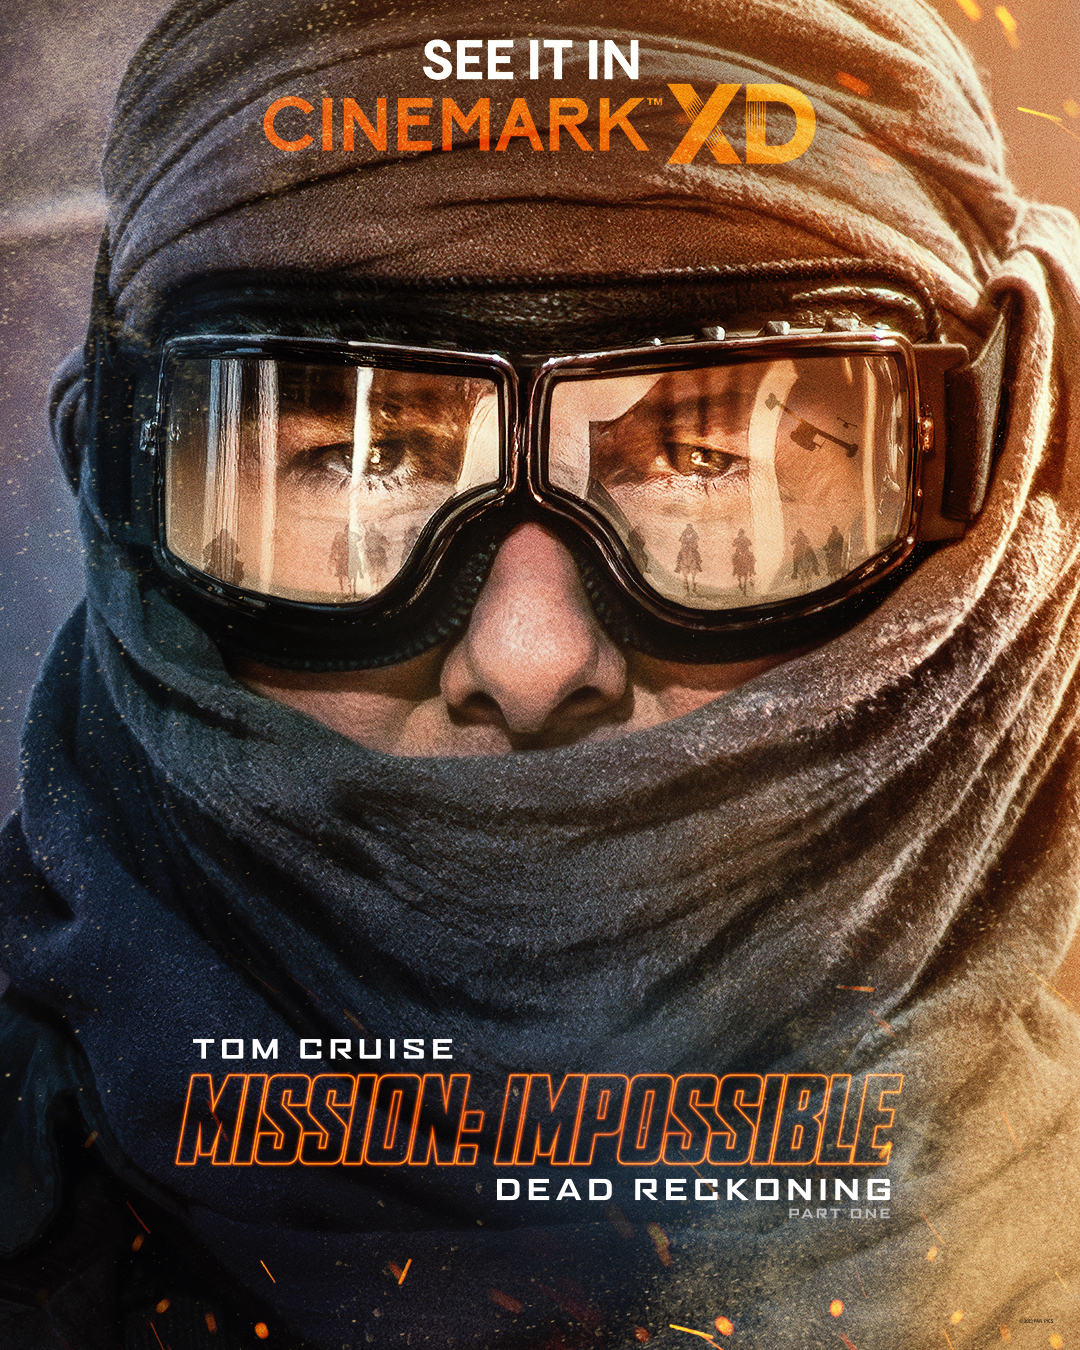 Mission Impossible Dead Reckoning Part One Cinemark XD Poster